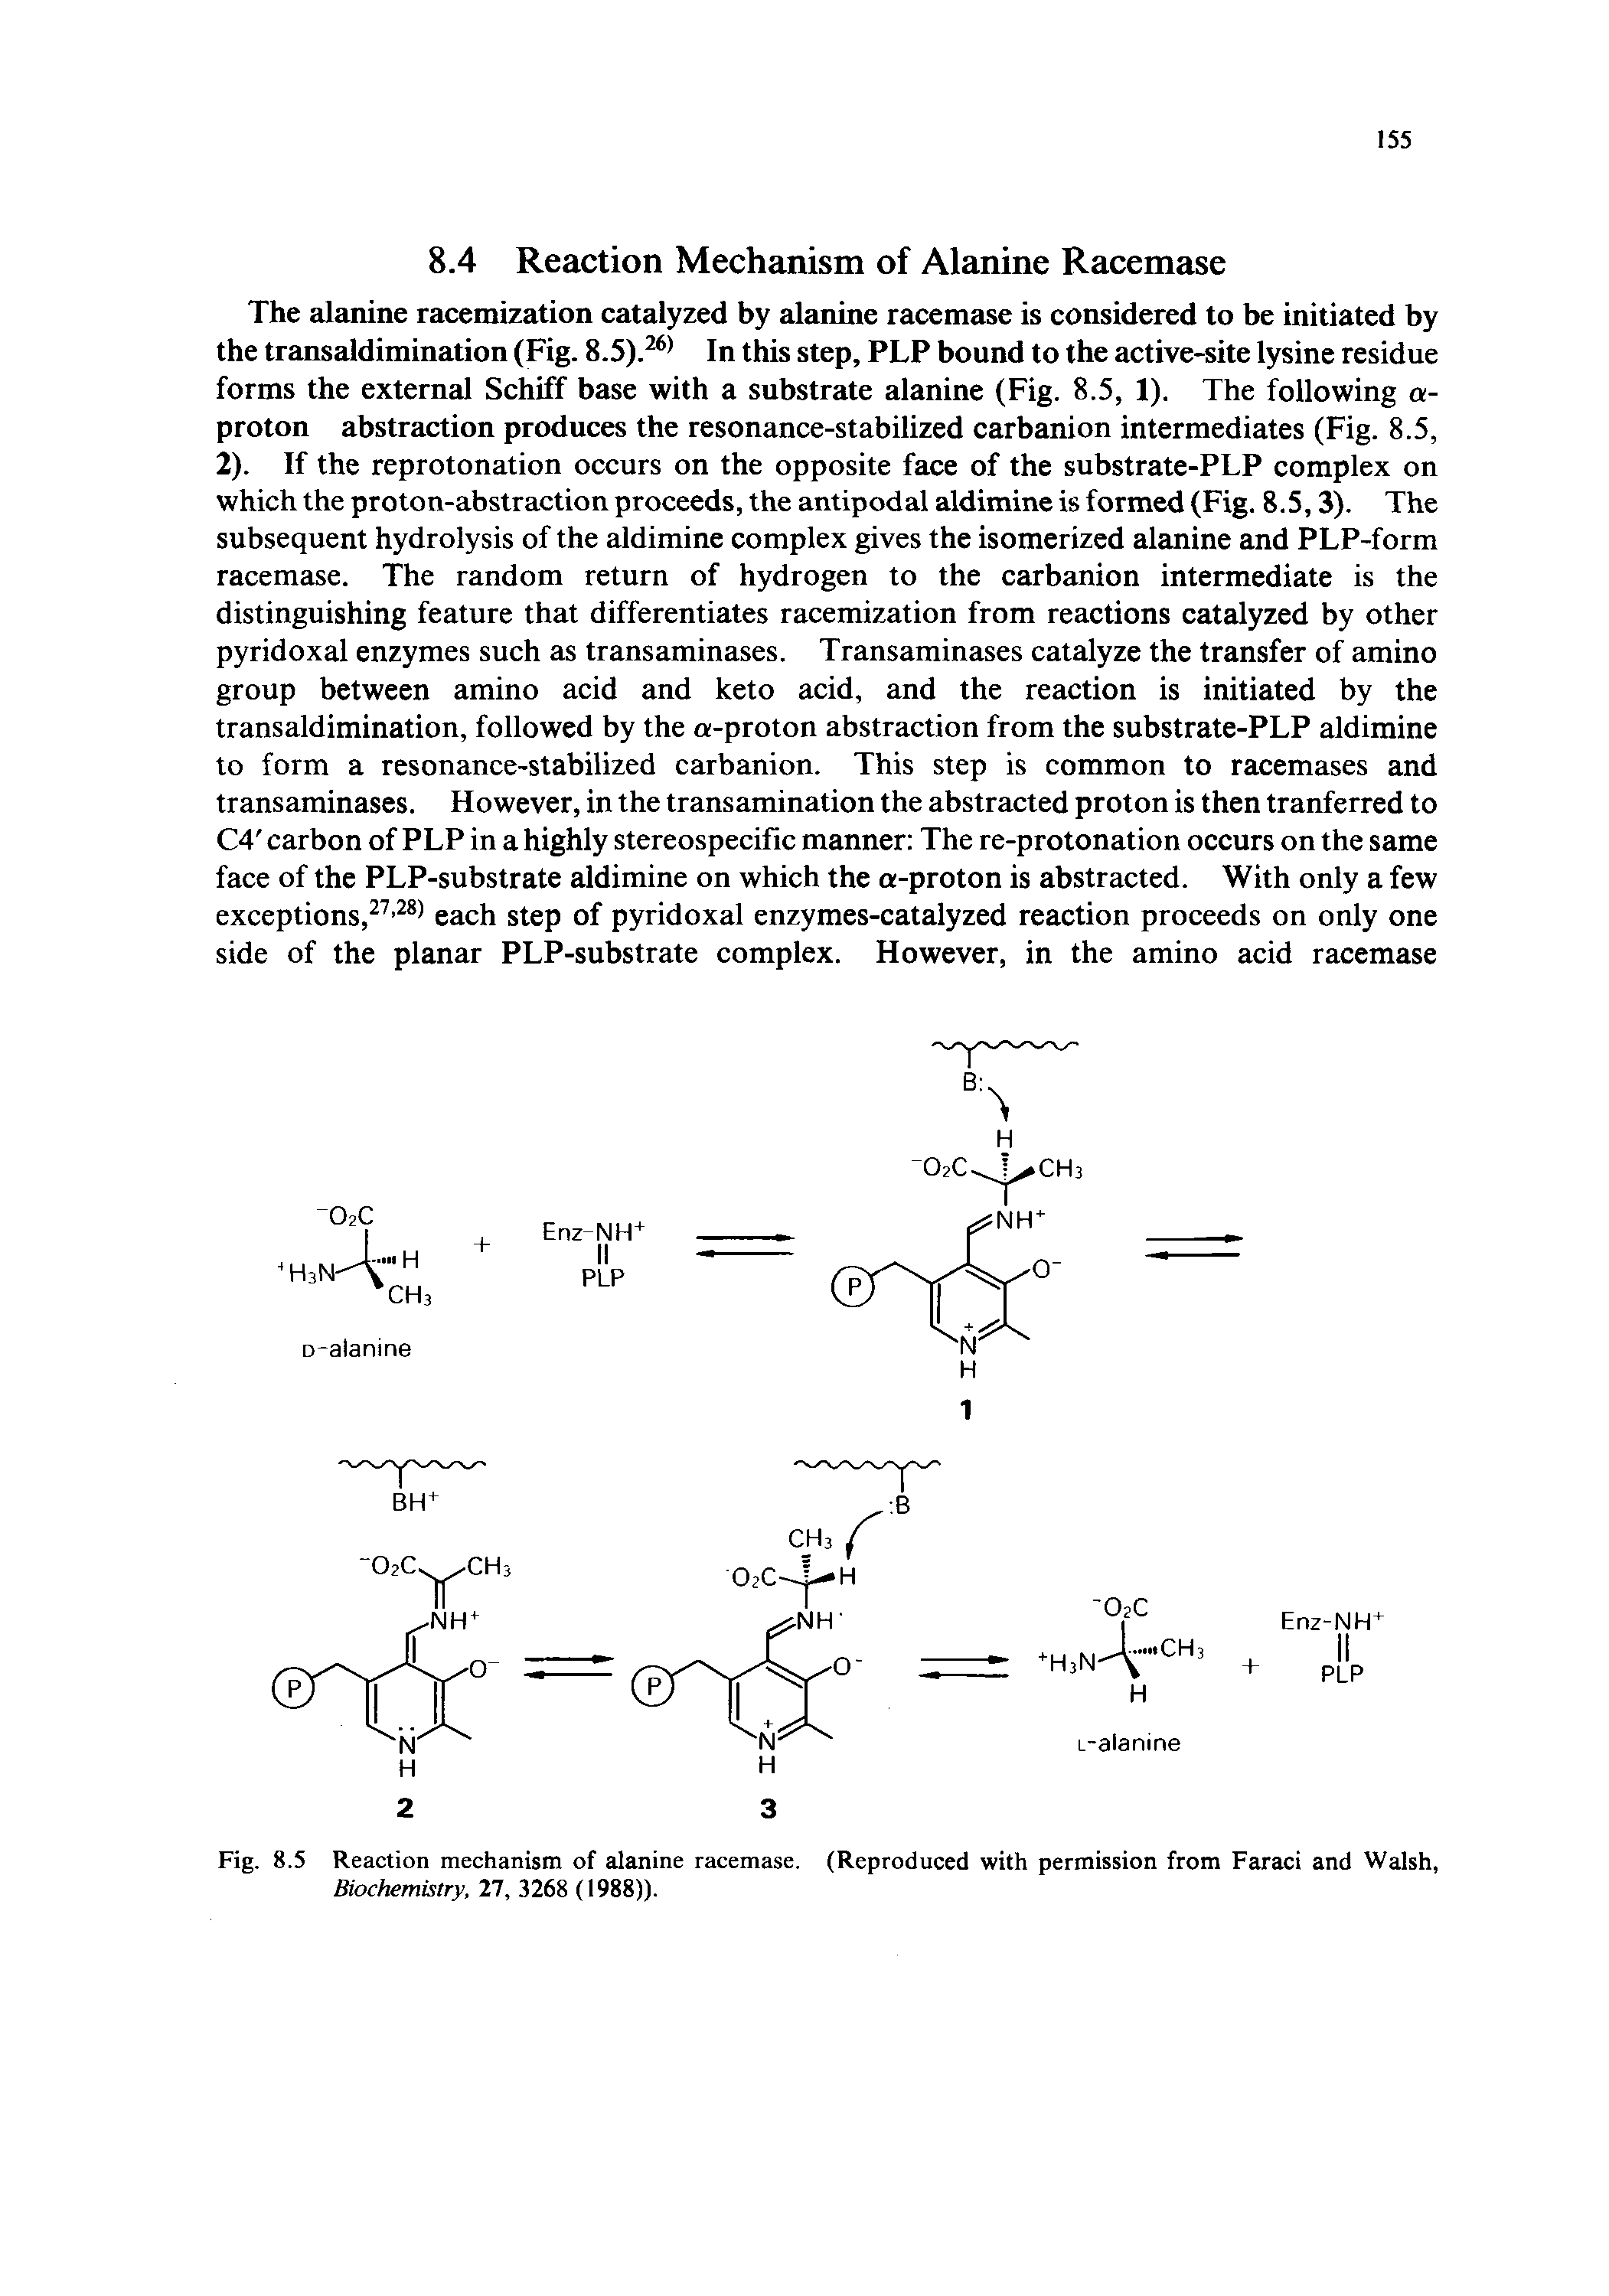 Fig. 8.5 Reaction mechanism of alanine racemase. (Reproduced with permission from Faraci and Walsh, Biochemistry, 27, 3268 (1988)).